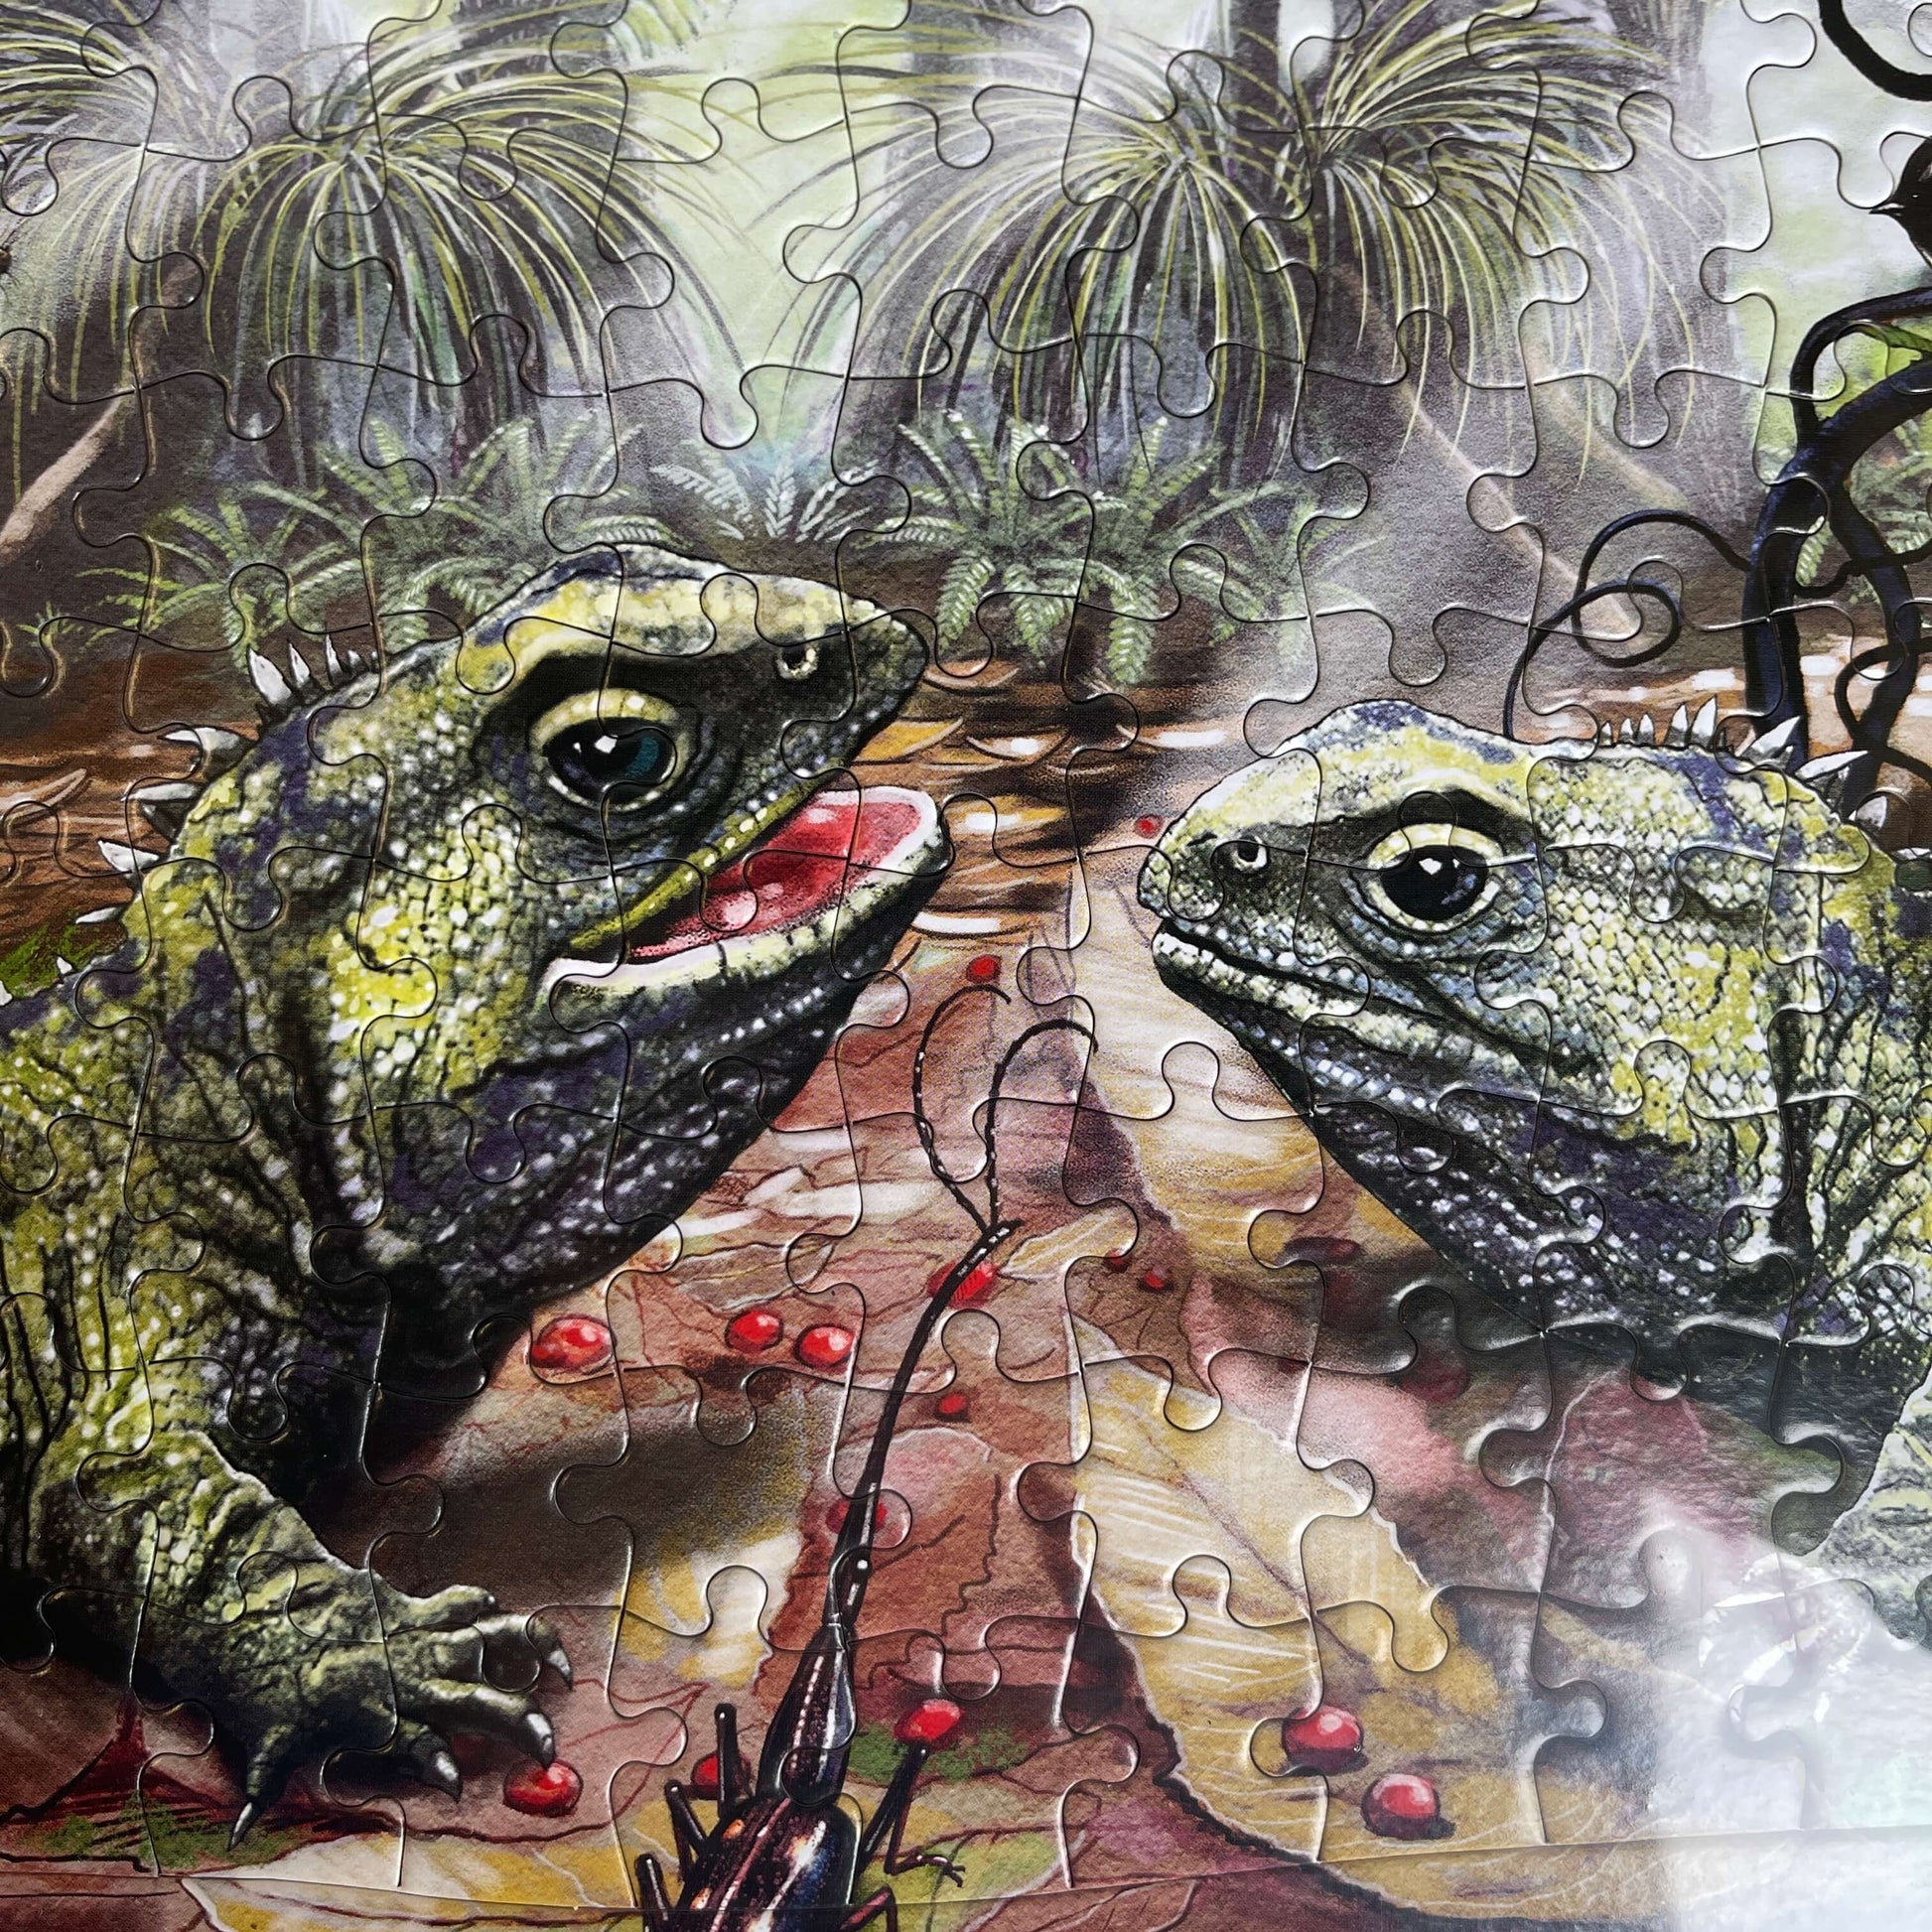 Jigsaw puzzle featuring two Tuatara lizards.